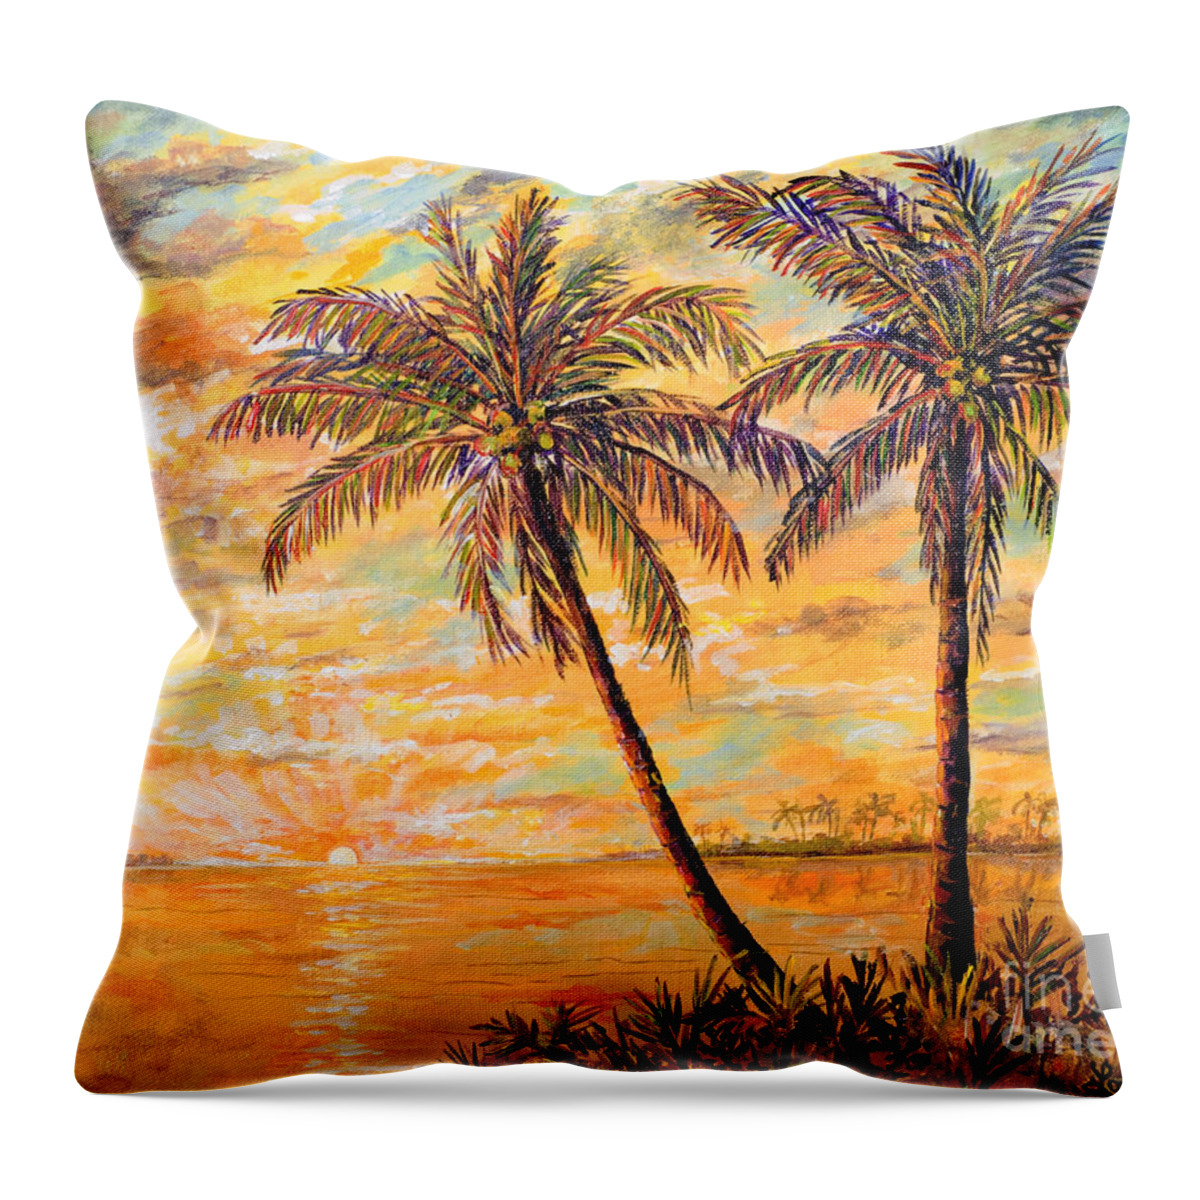 Florida Landscape Throw Pillow featuring the painting Golden Tropics by Lou Ann Bagnall